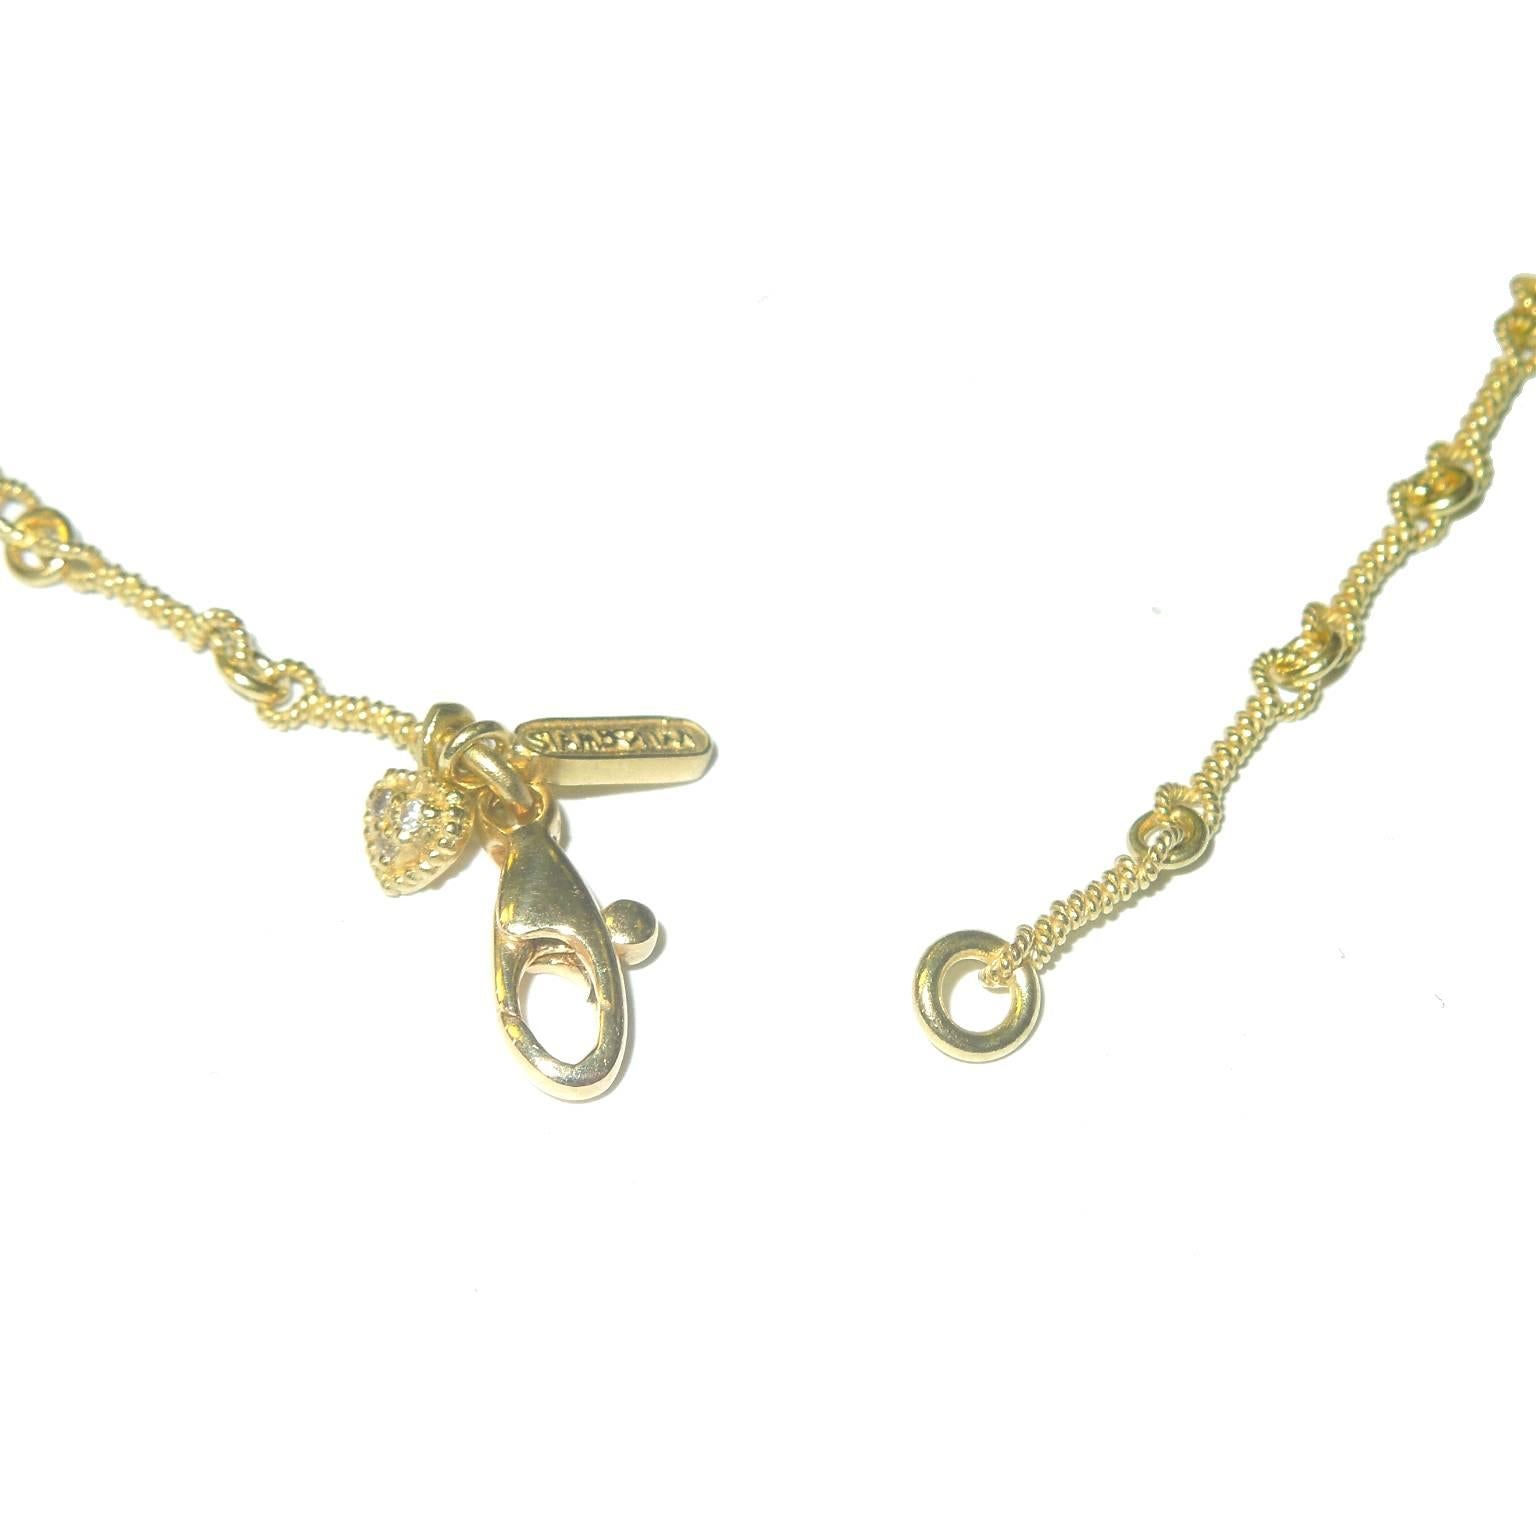 Women's Stambolian Diamond Gold Necklace with Heart Pendant